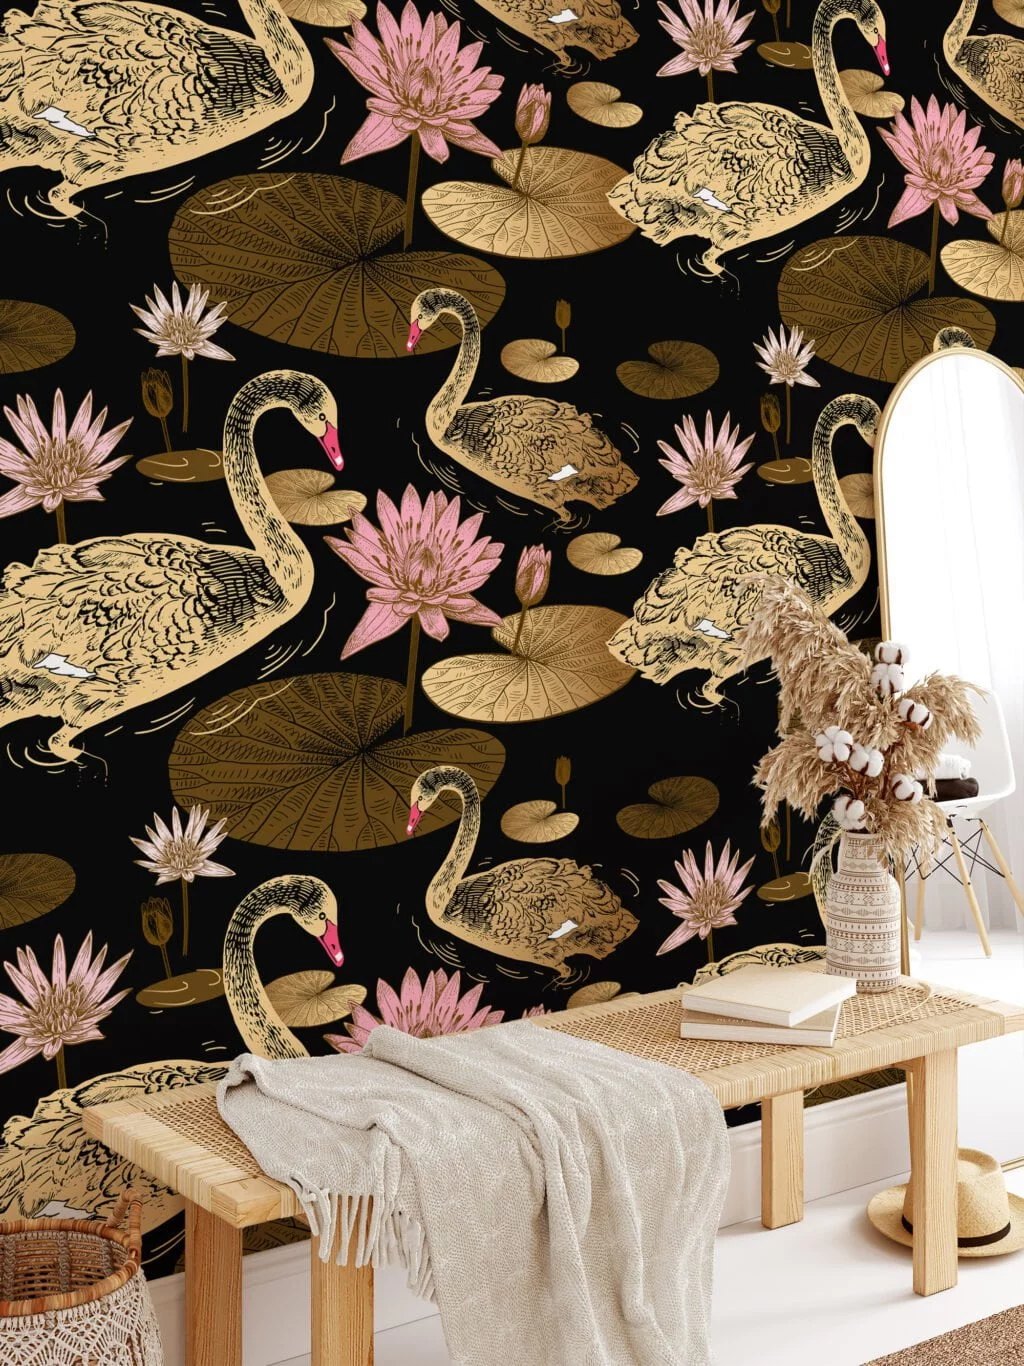 Large Gold Colored Lily Pads And Swans With A Dark Background Wallpaper, Vintage Black & Gold Elegance Peel & Stick Wall Mural